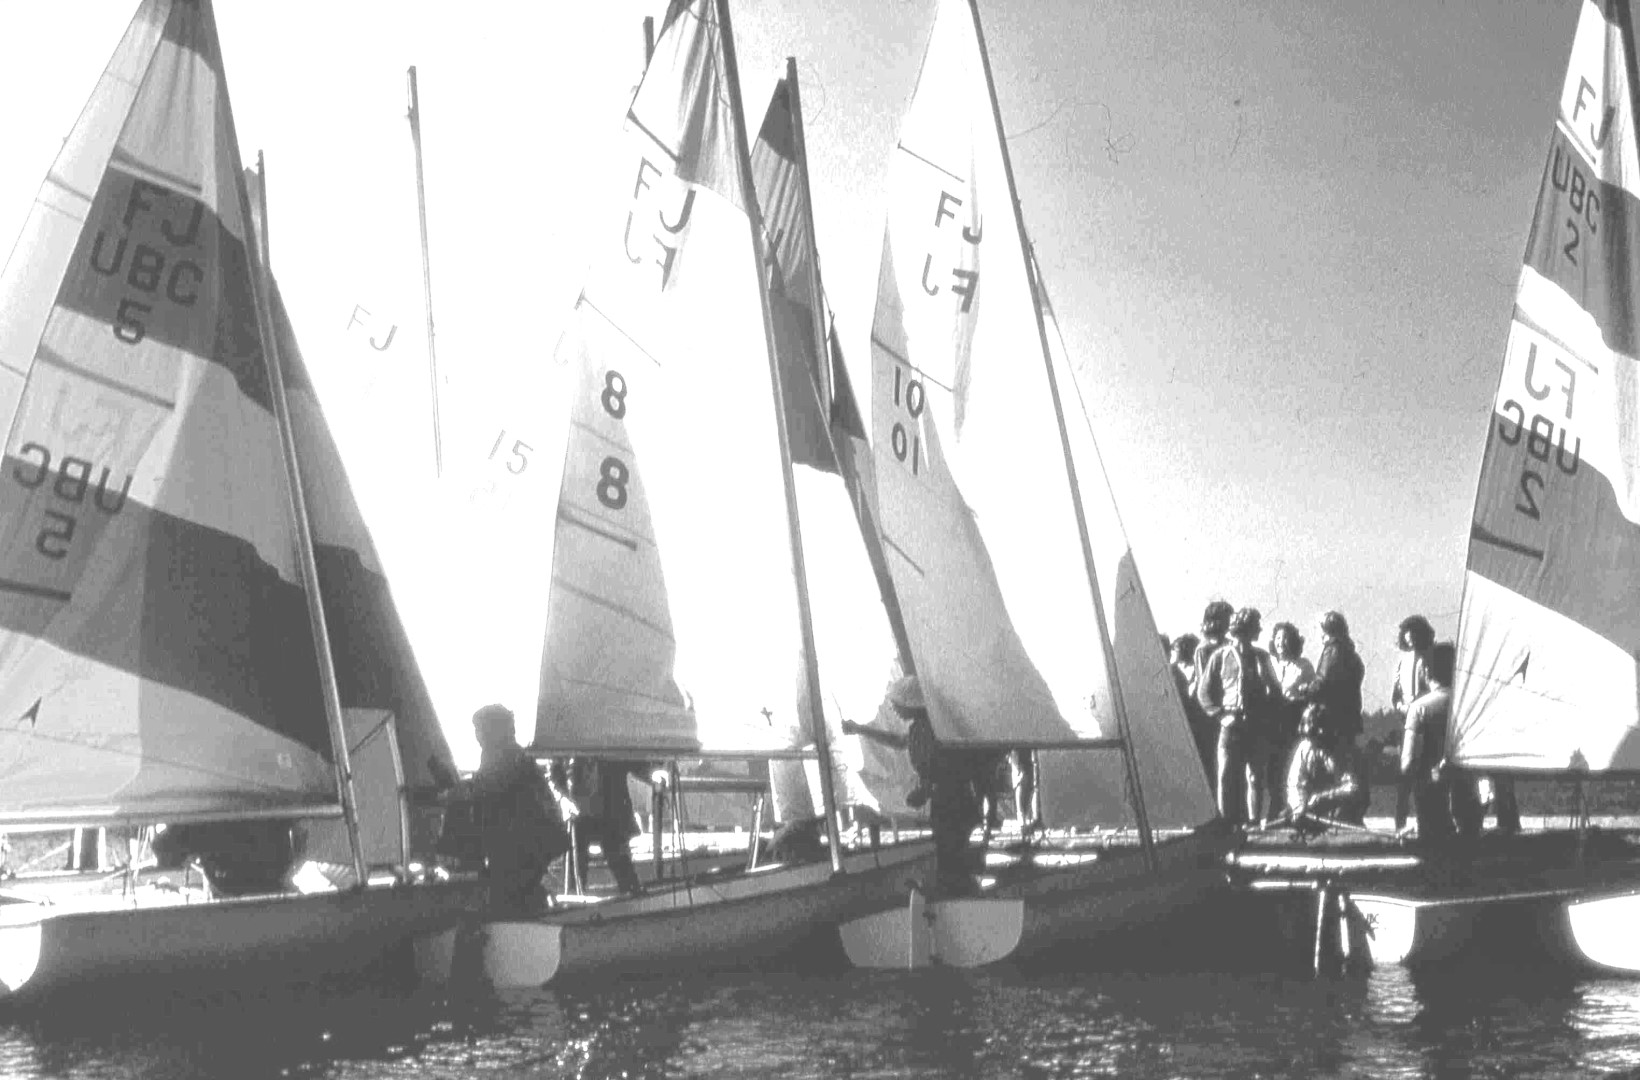 Readying the boats at the dock for a race 